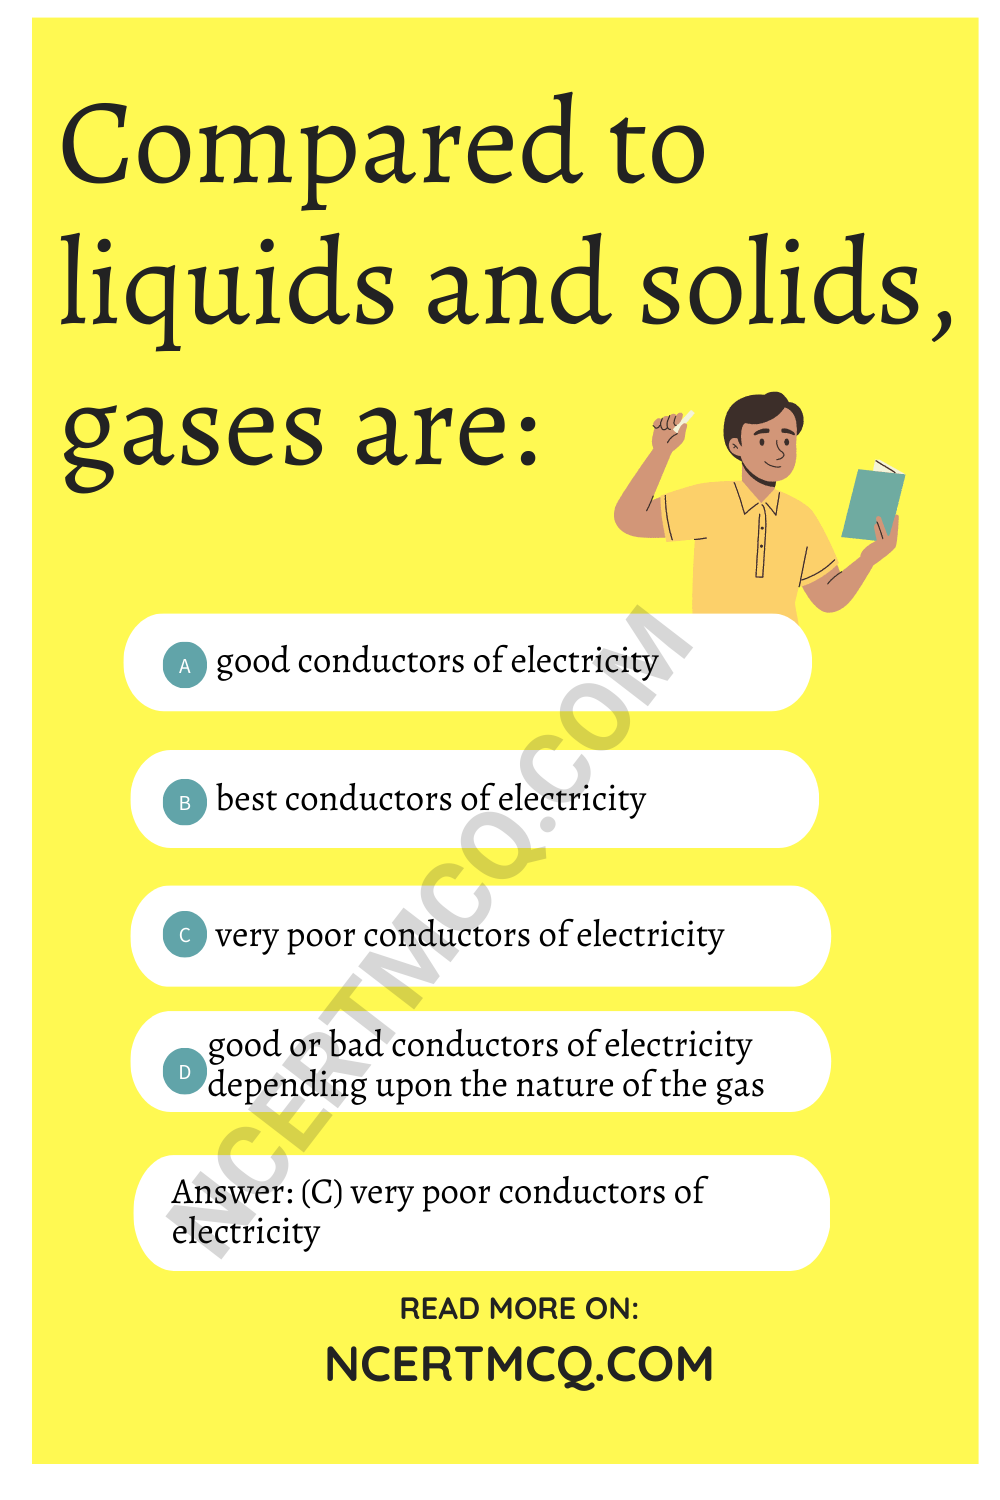 Compared to liquids and solids, gases are: